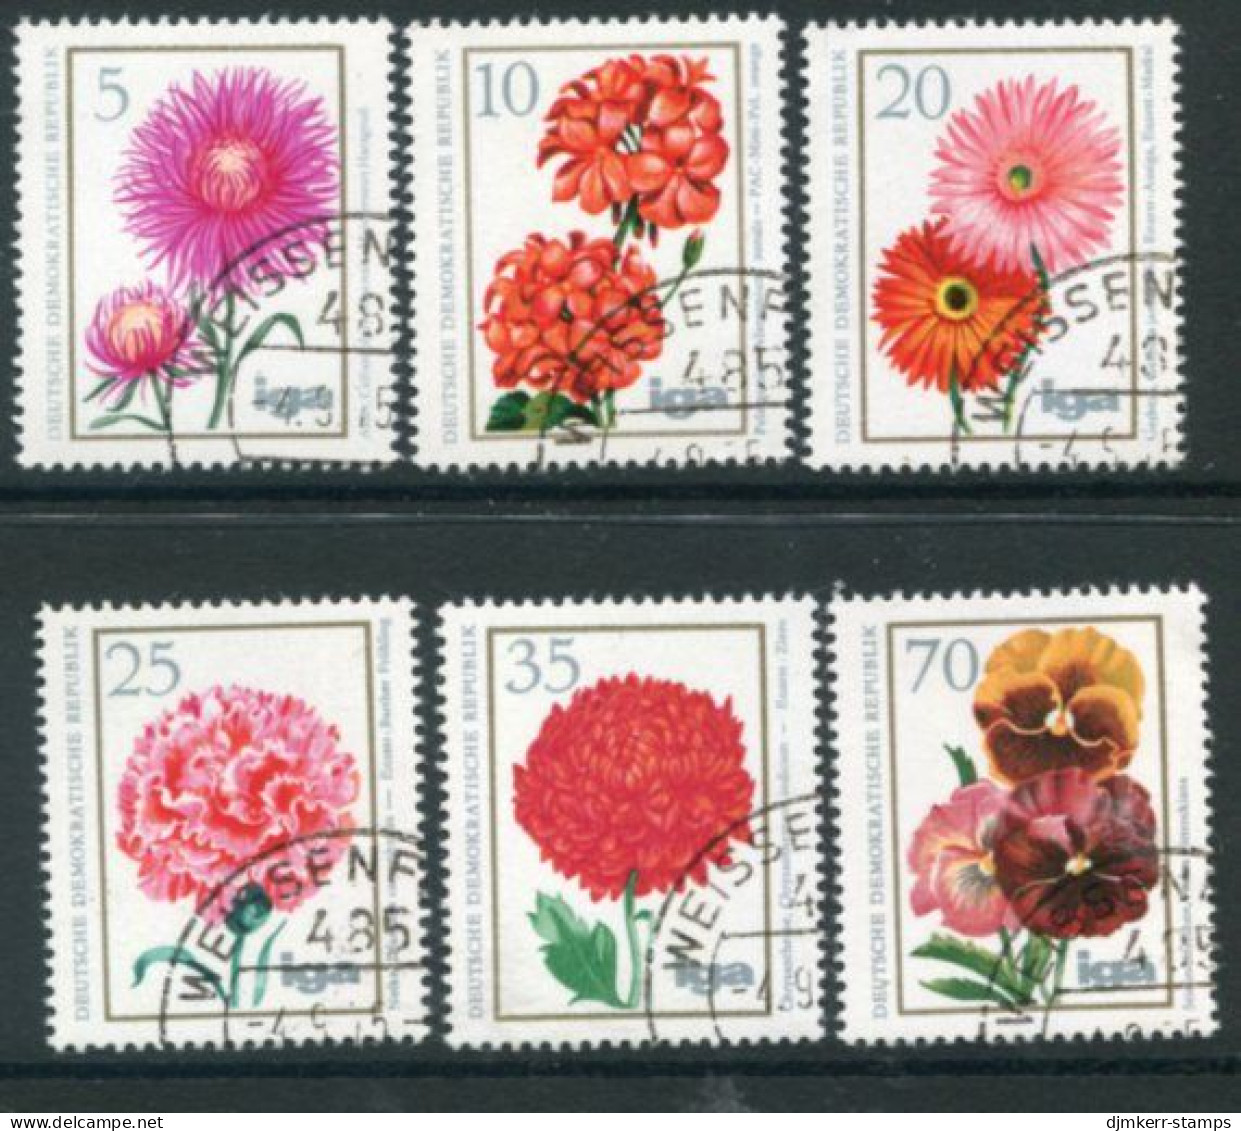 DDR / E. GERMANY 1975 Flowers Used.  Michel 2070-75 - Used Stamps